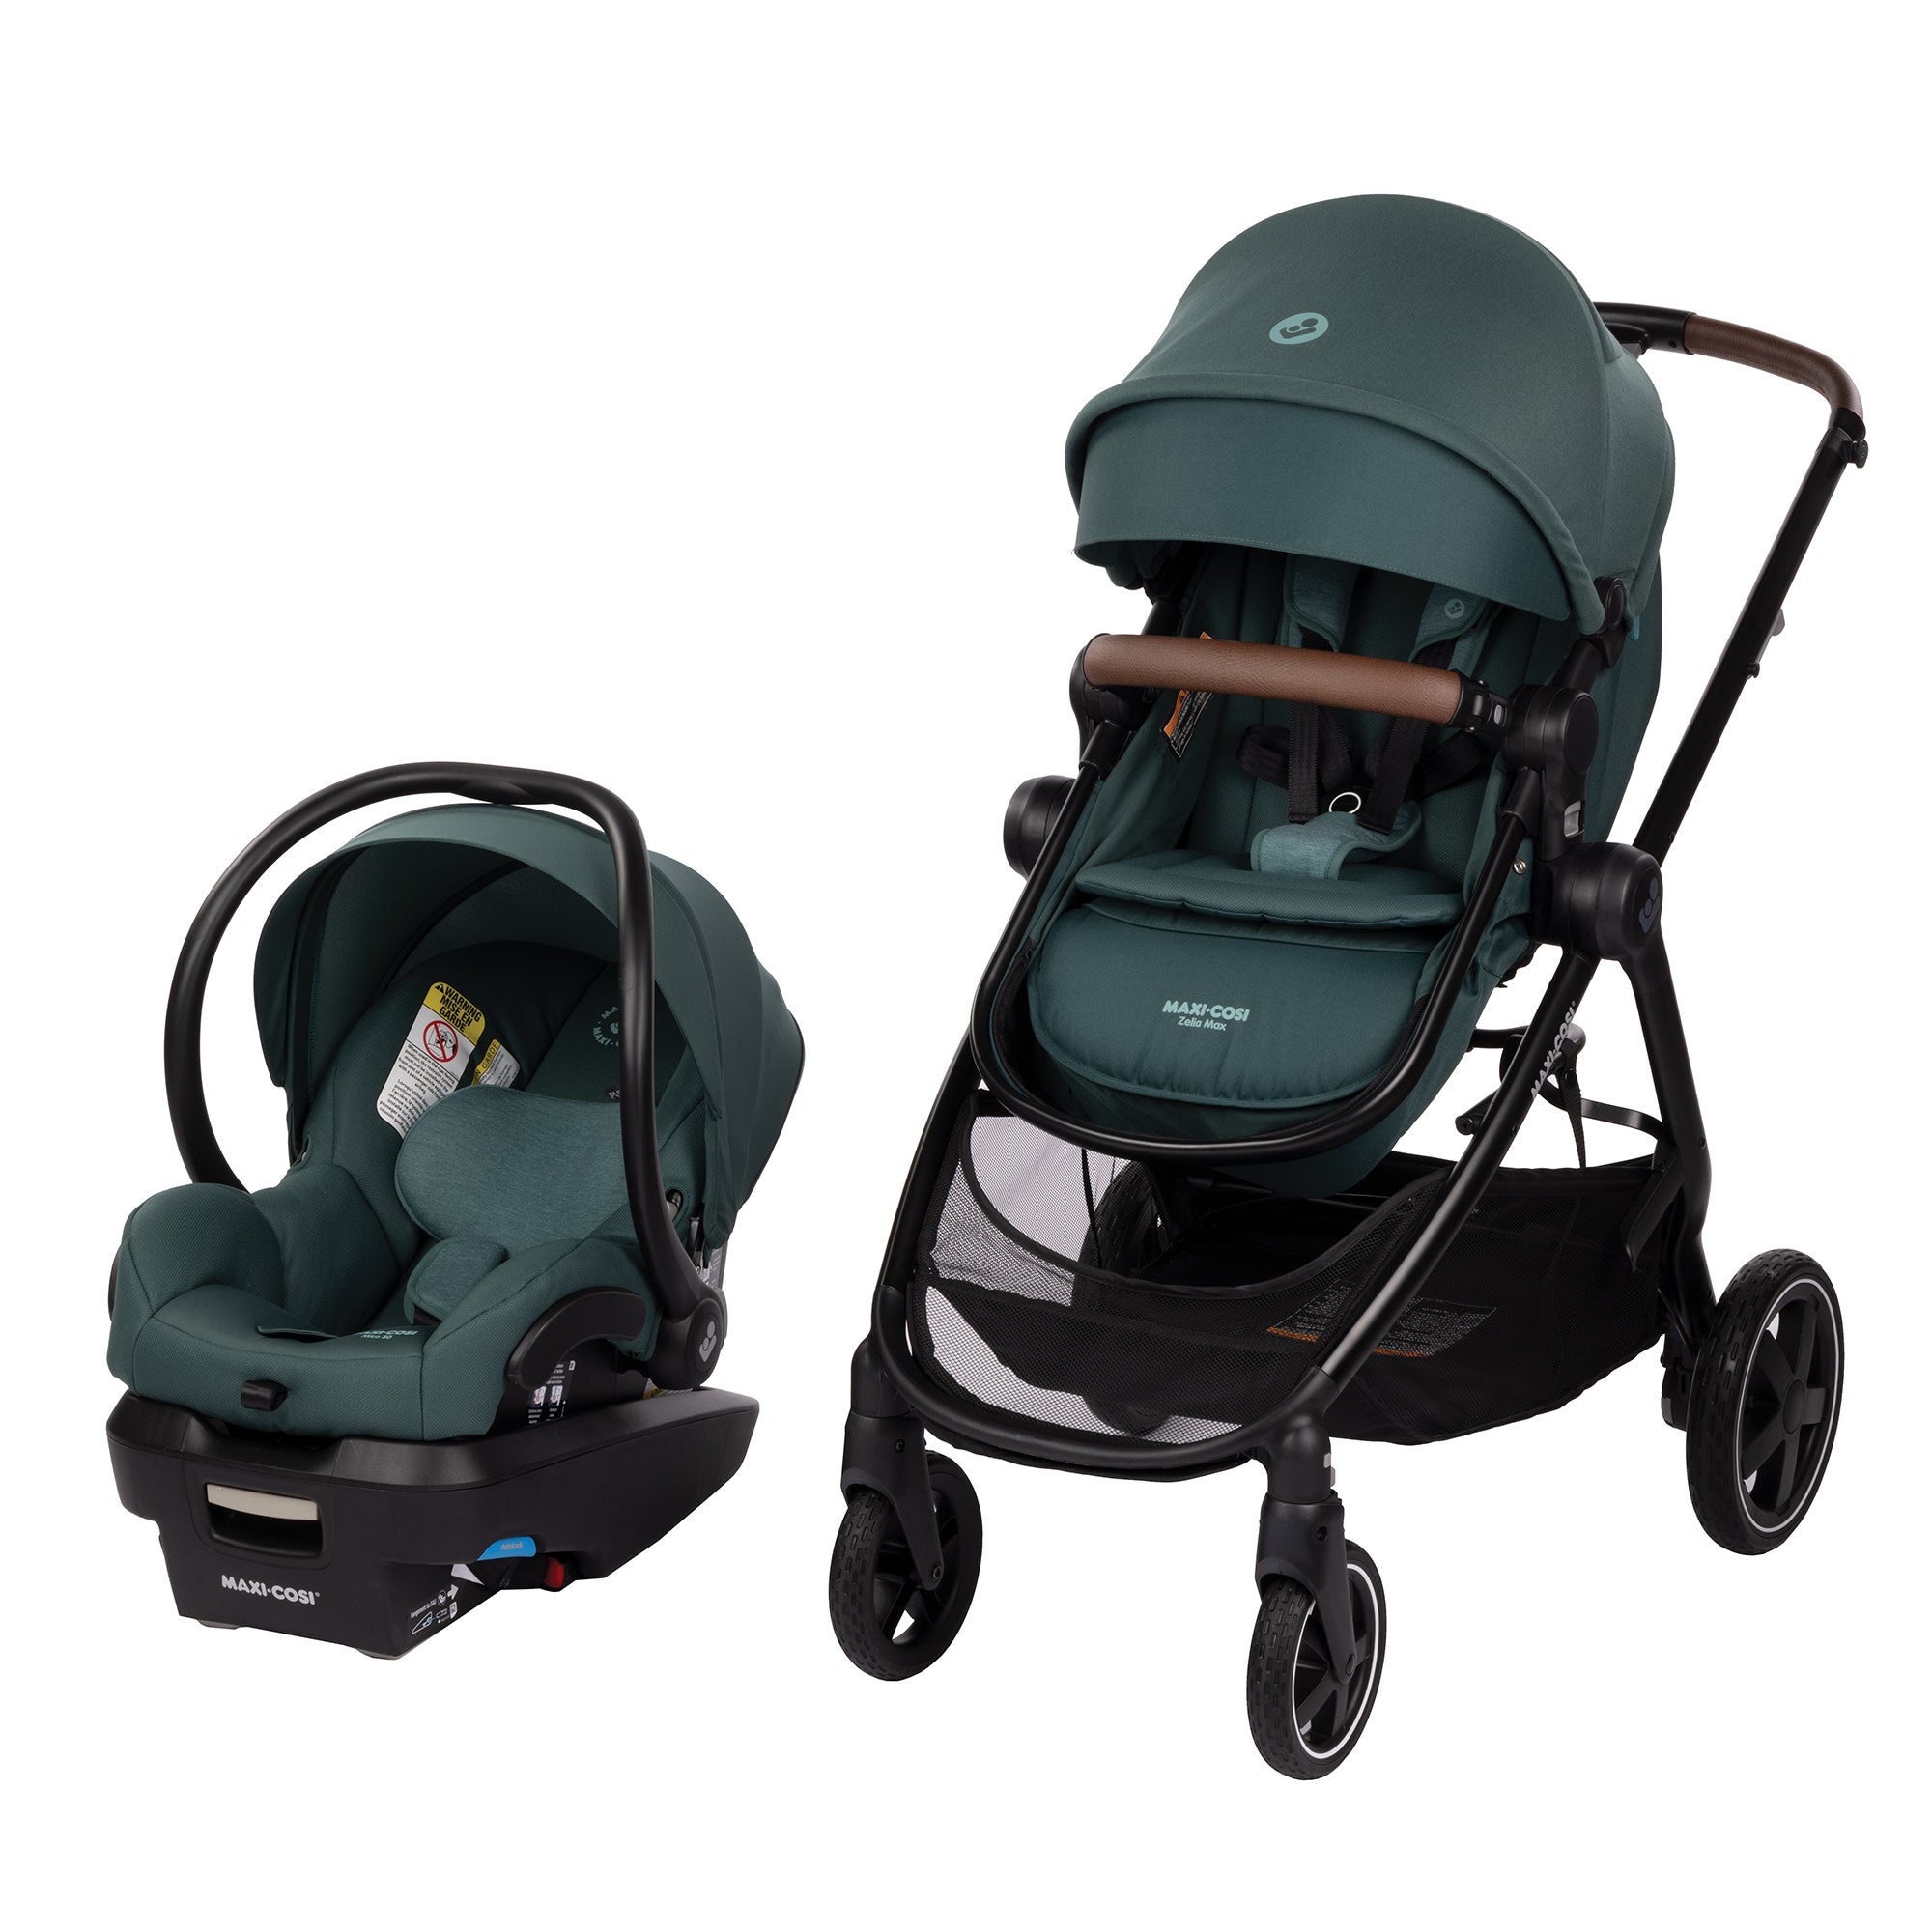 Maxi-Cosi Official Site | Car Seats, Strollers & Baby Gear – Dorel 